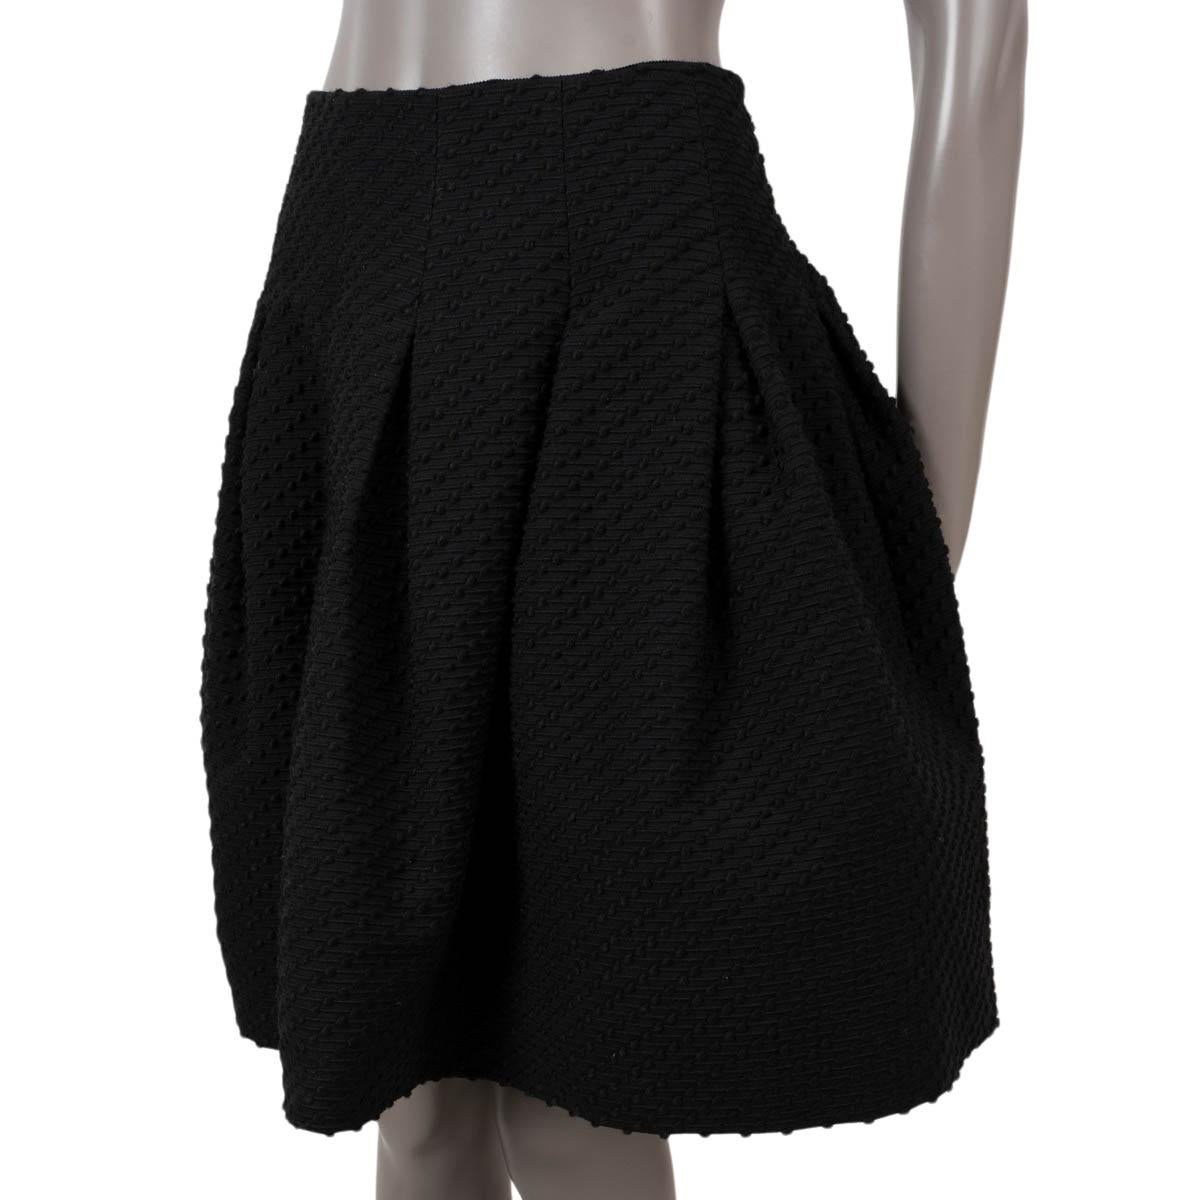 100% authentic Oscar de la Renta flared, pleated nubbed skirt in black acrylic (48%), cotton (28%), viscose (6%) and elastane (1%). Opens with a concealed zipper on the back and is lined in black silk (100%) with tulle band on the bottom for extra